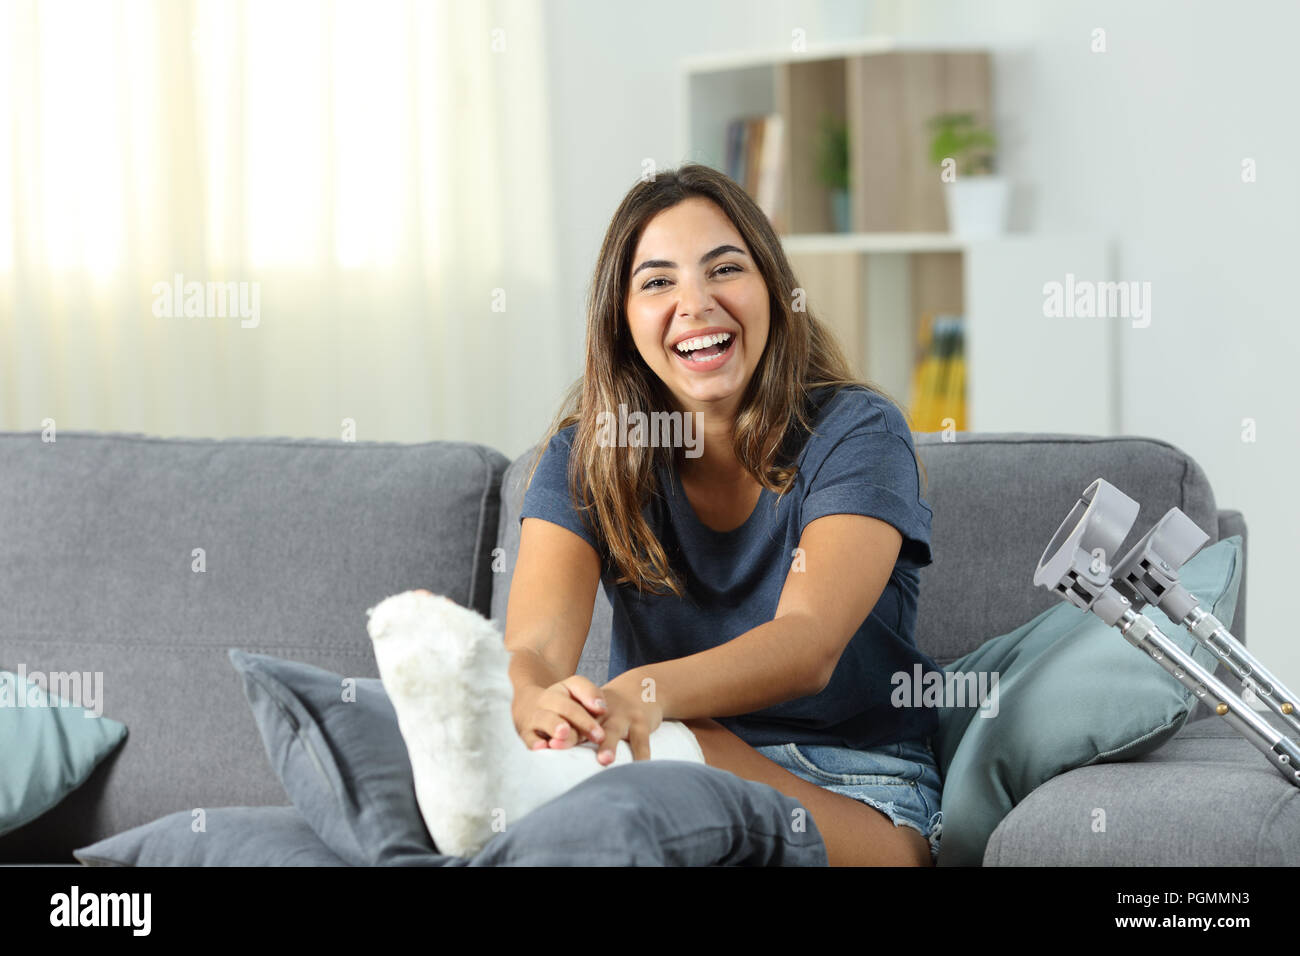 Disabled woman laughing looking at you sitting on a couch in the living room at home Stock Photo